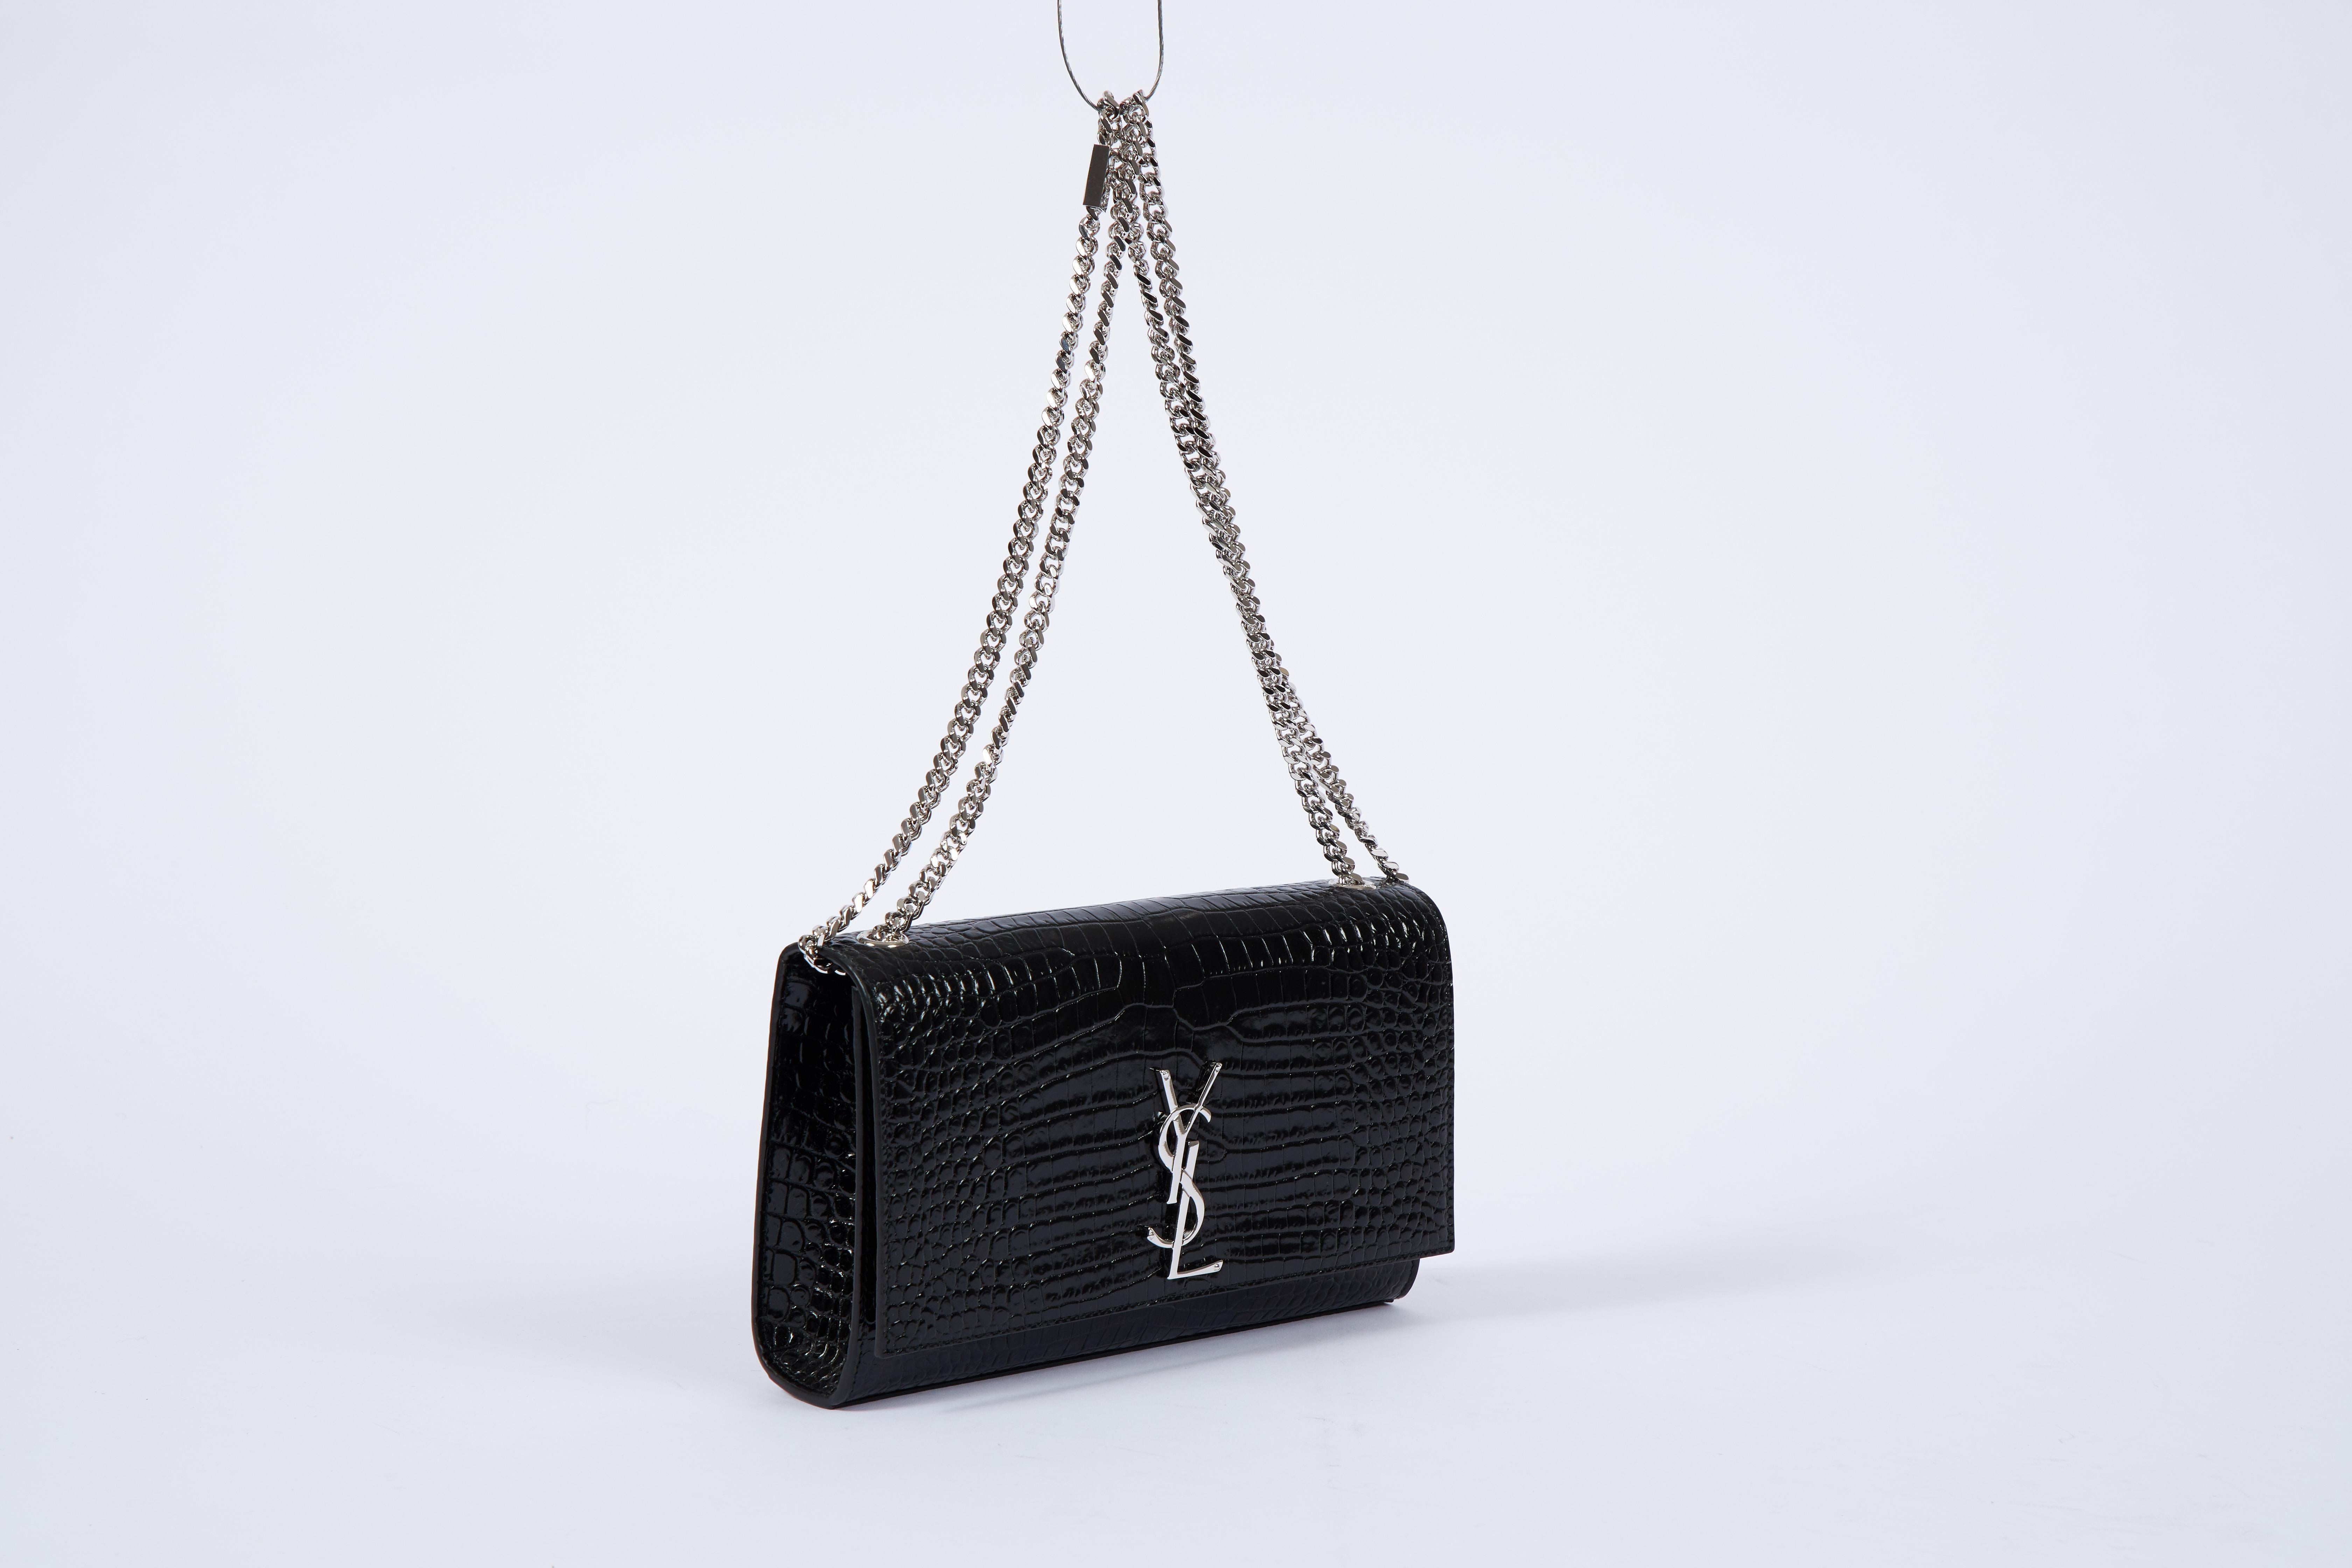 YSL Yves Saint Laurent black patent crocodile embossed handbag with silver tone hardware. Can be worn shoulder length or cross body. Comes with booklet and original dust cover.
